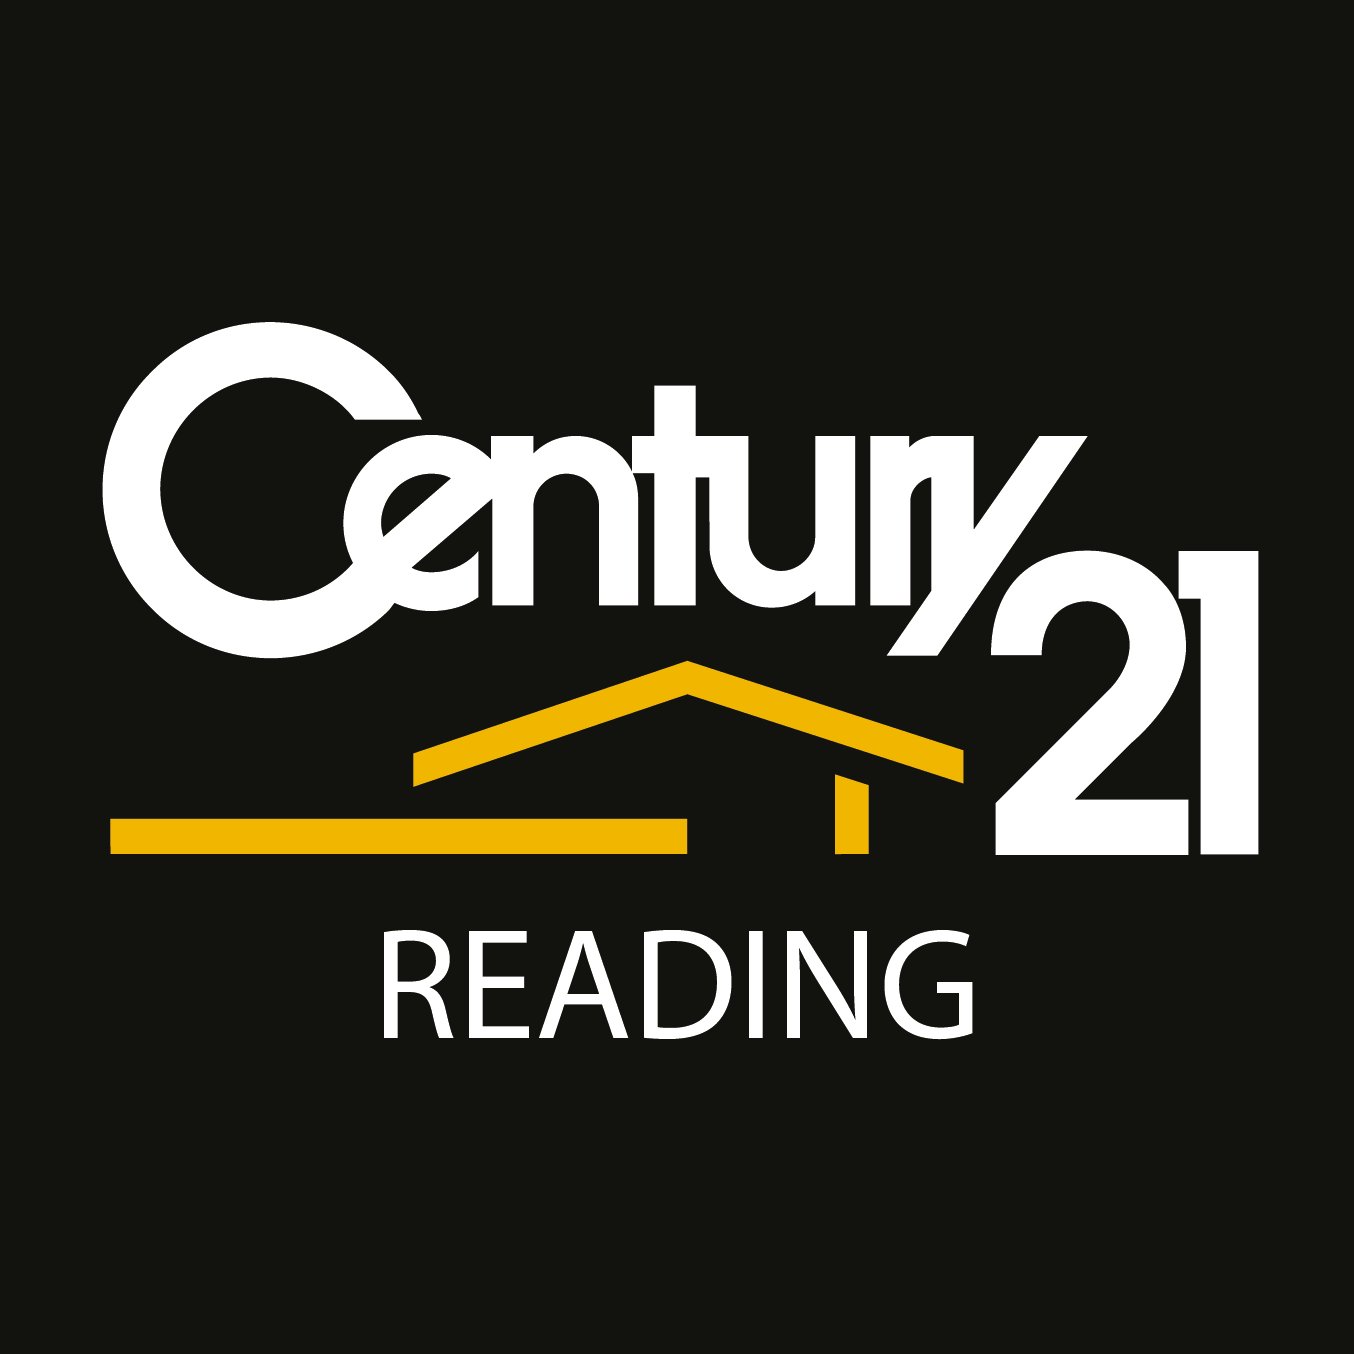 Welcome to the official twitter of Century 21 Reading.  Feel free to pop into our office at 2-4 Wokingham Road, RG6 1JG or give us a call on 01184664151